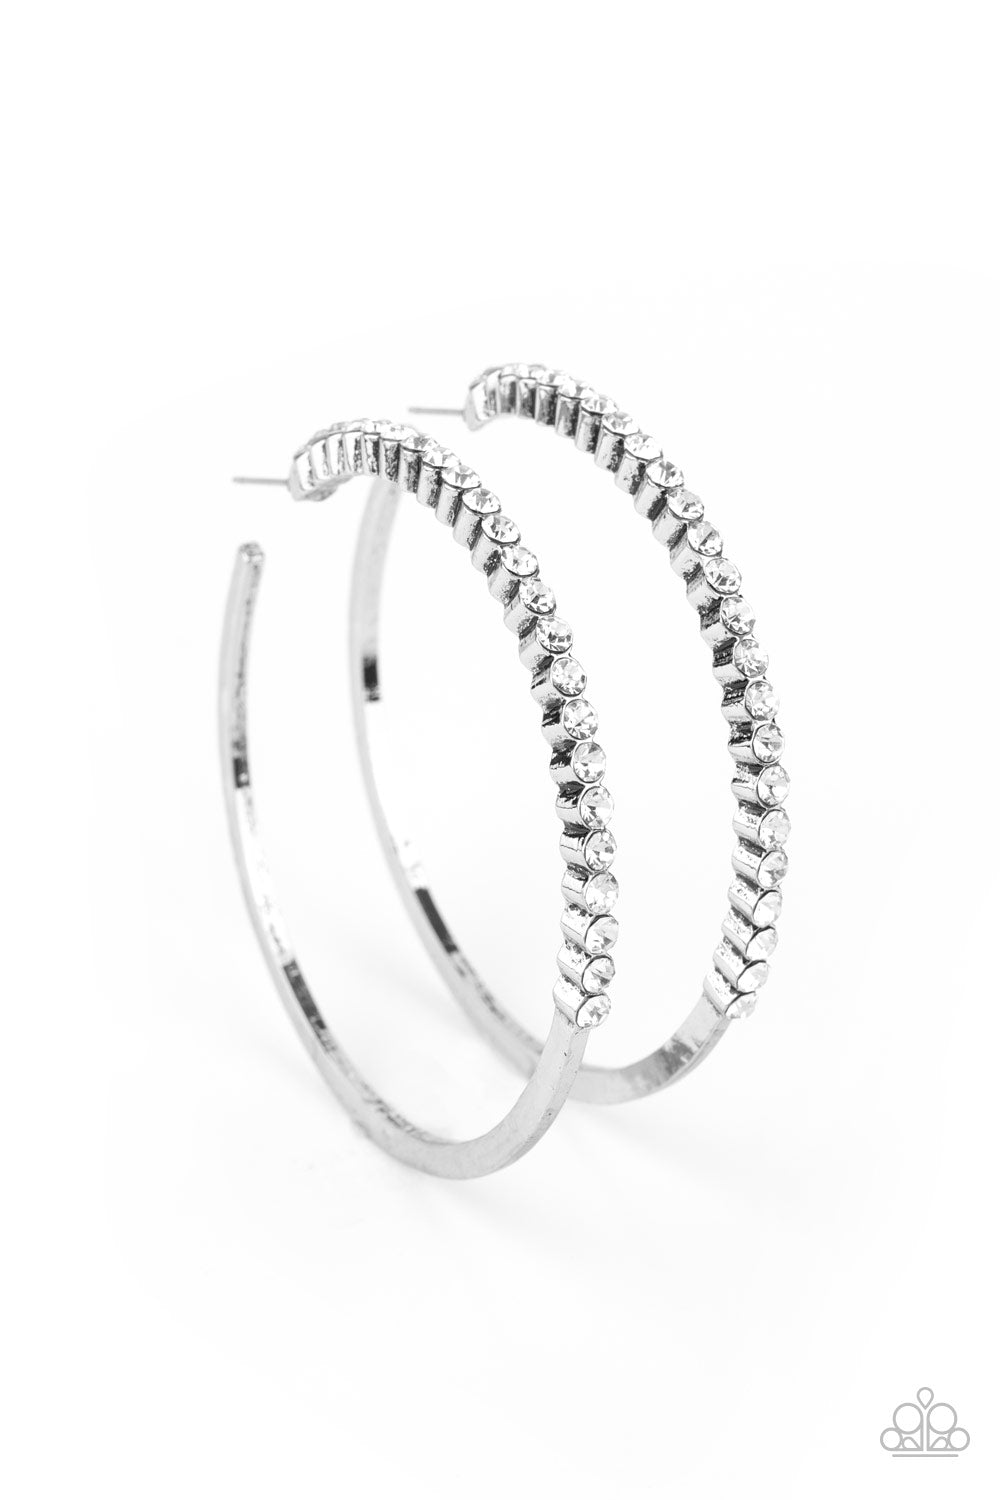 Paparazzi Making Rounds - White Hoop Earrings - A Finishing Touch Jewelry